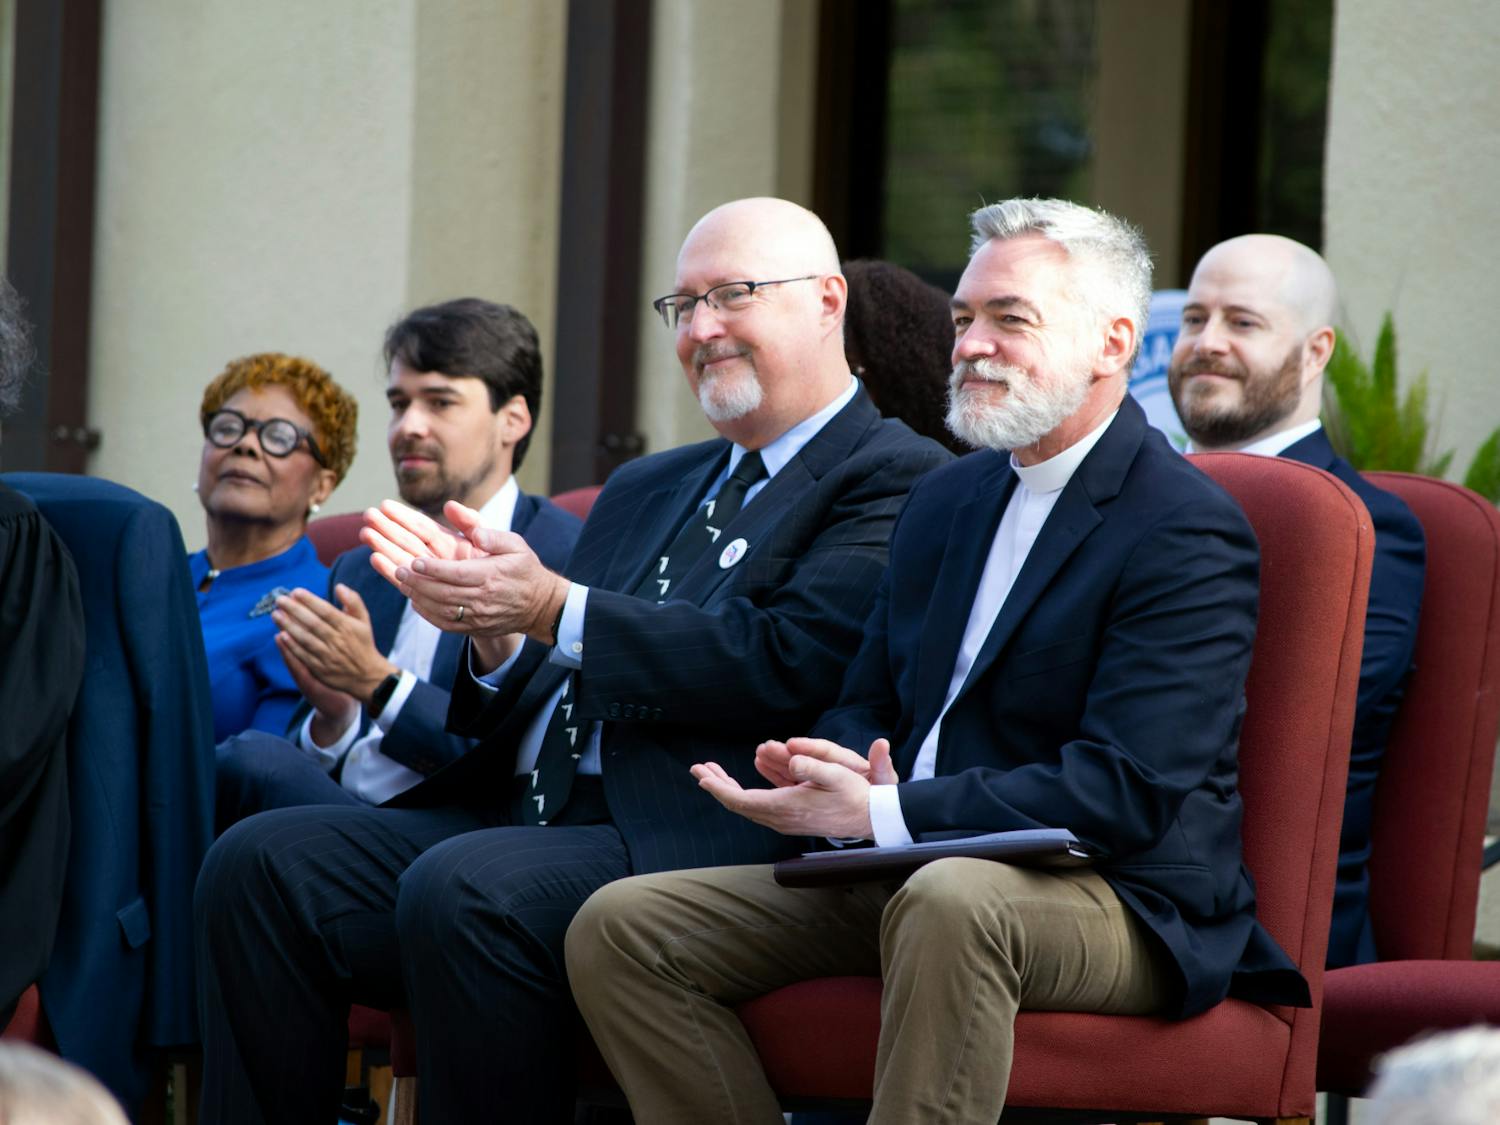 Harvey Ward (left) and Rev. Fletcher of Holy Trinity Episcopal Church (right) clapping after a speech delivered at the swearing-in ceremony for Gainesville Mayor Thursday, Jan. 5, 2023. 